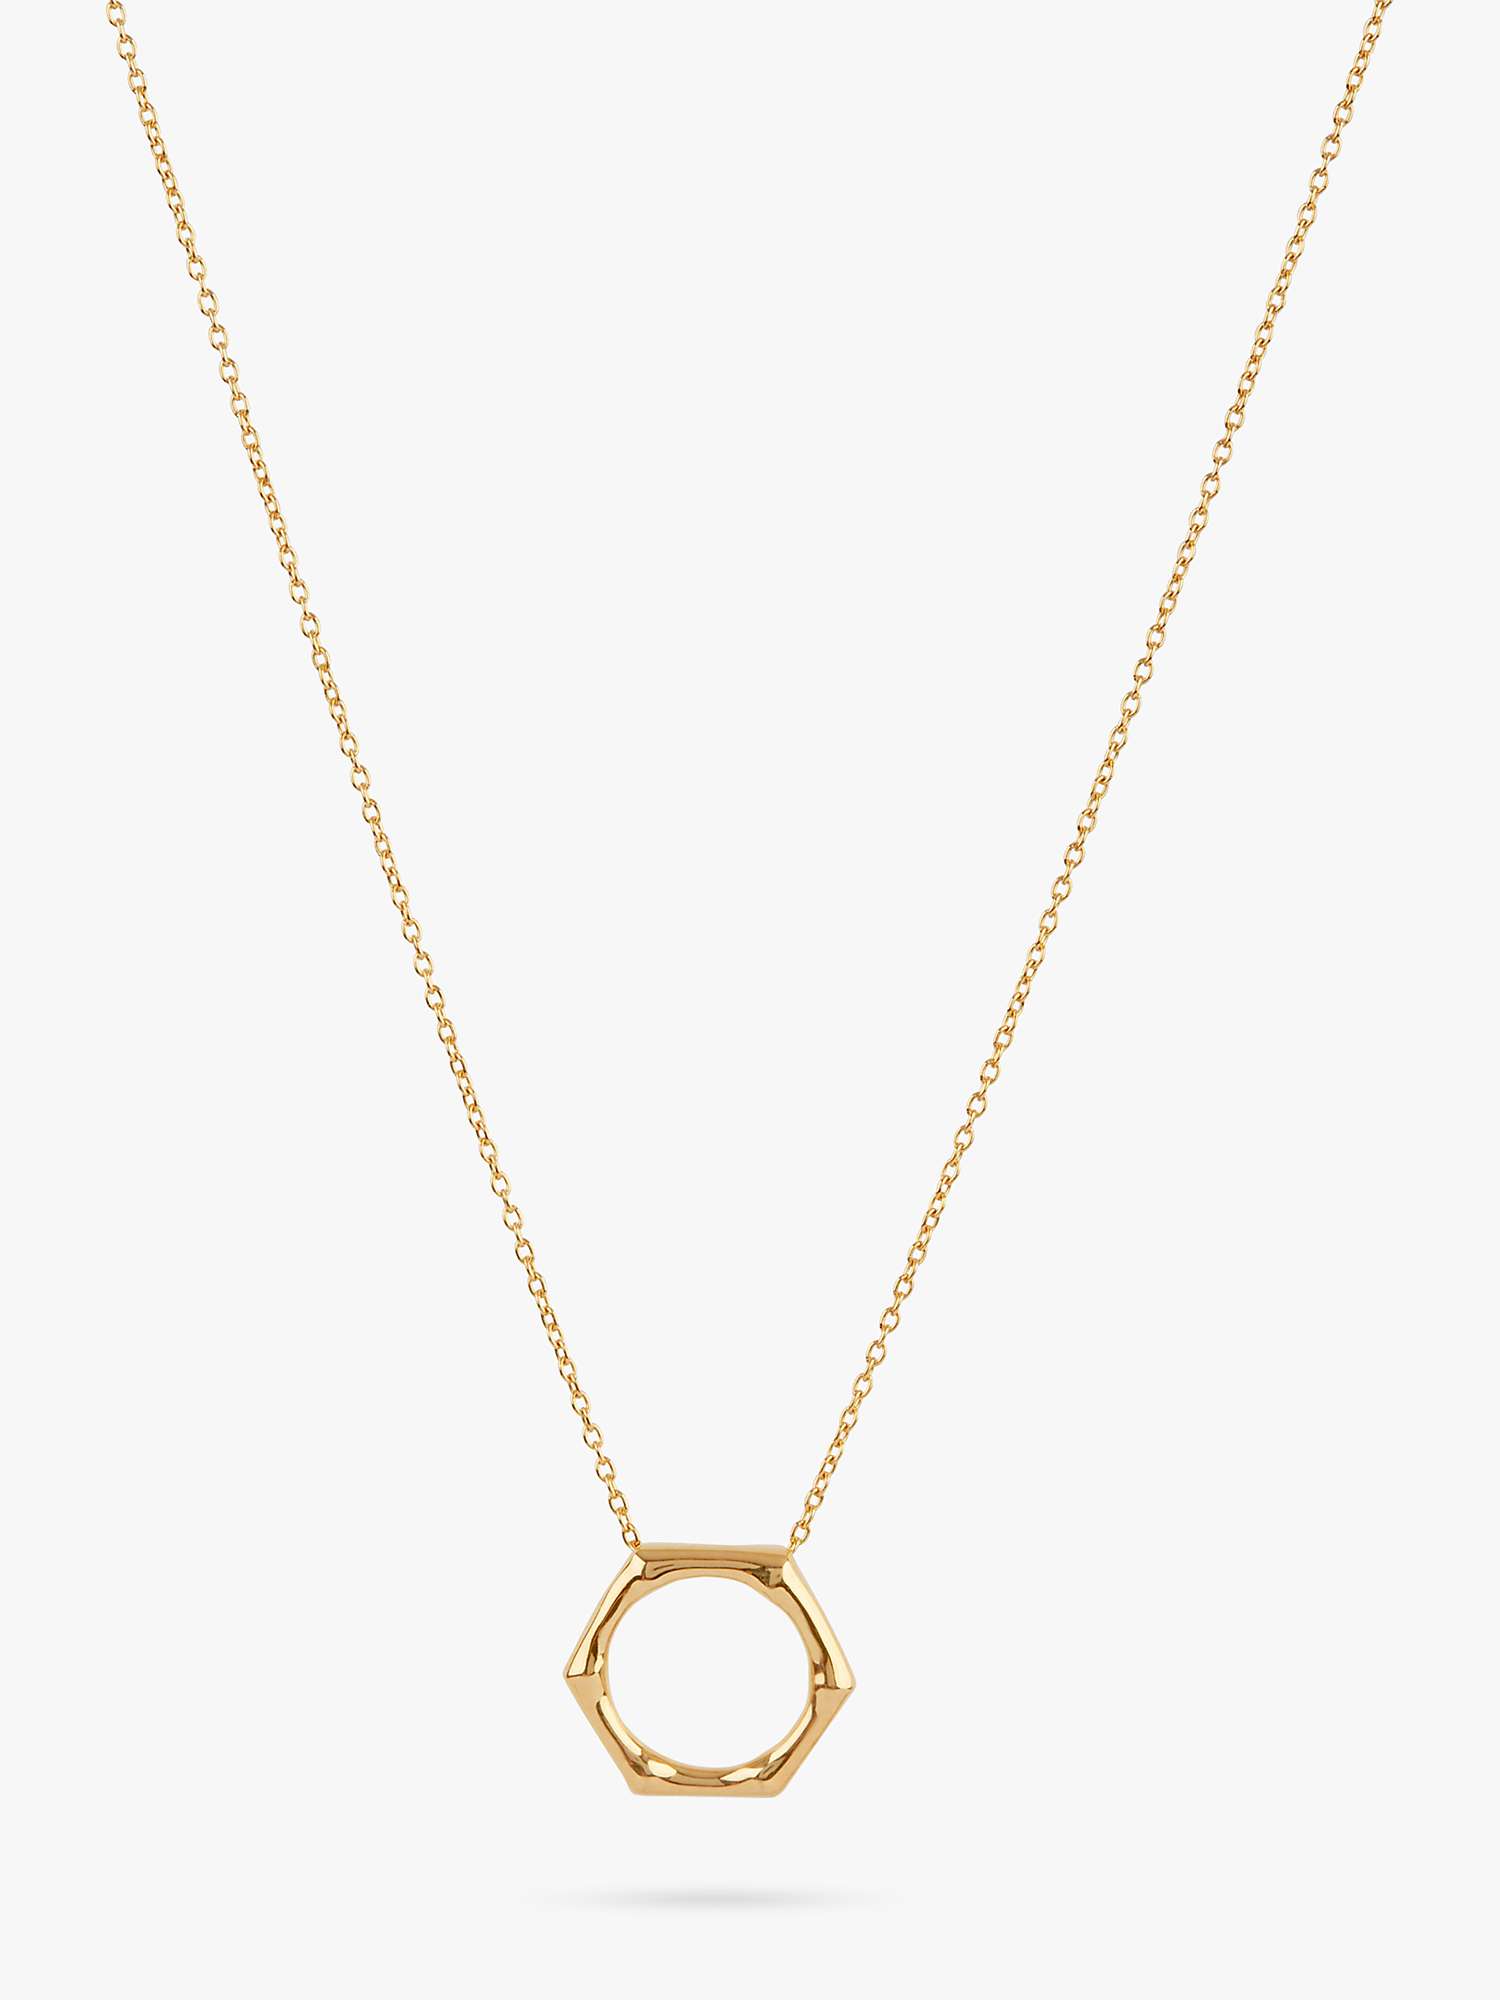 Buy Dinny Hall Bamboo Round Slider Pendant Necklace Online at johnlewis.com